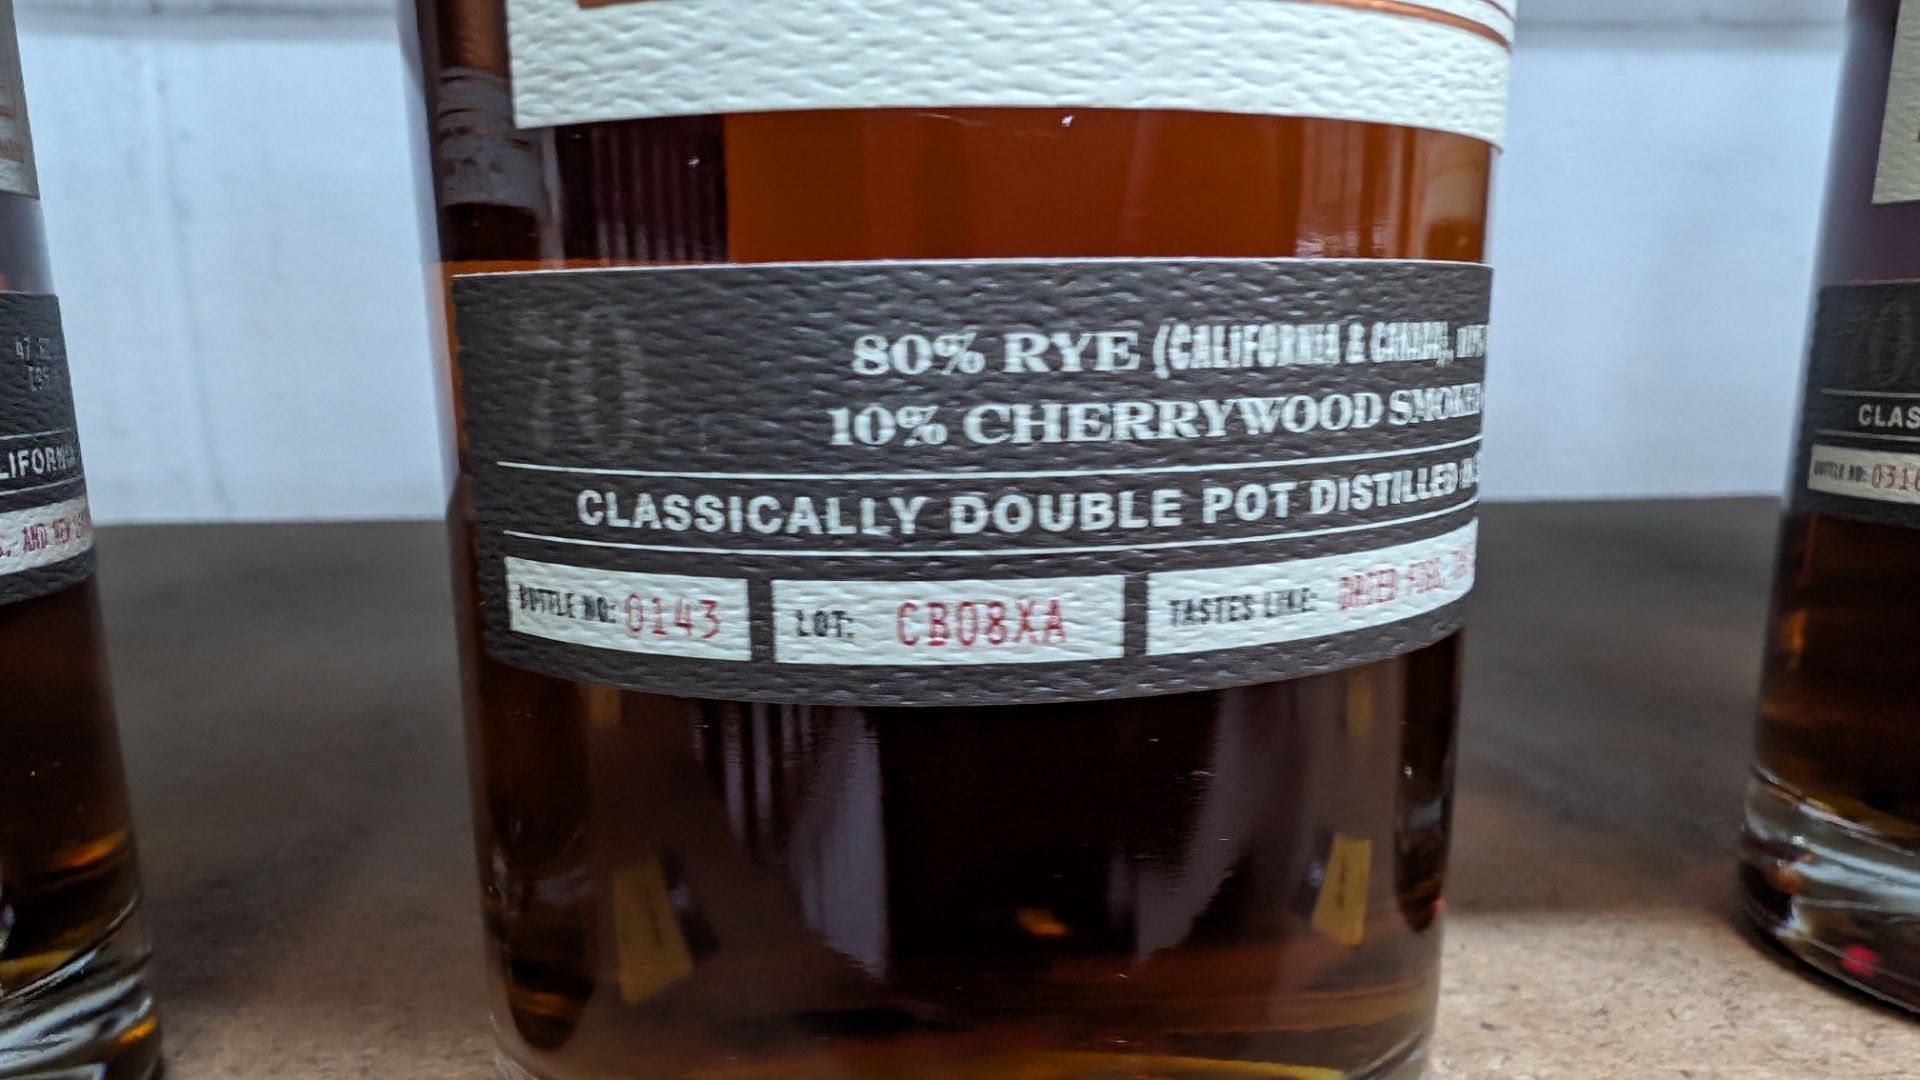 1 off 700ml bottle of Sonoma Cherrywood Rye Whiskey. 47.8% alc/vol (95.6 proof). Distilled and bot - Image 5 of 5